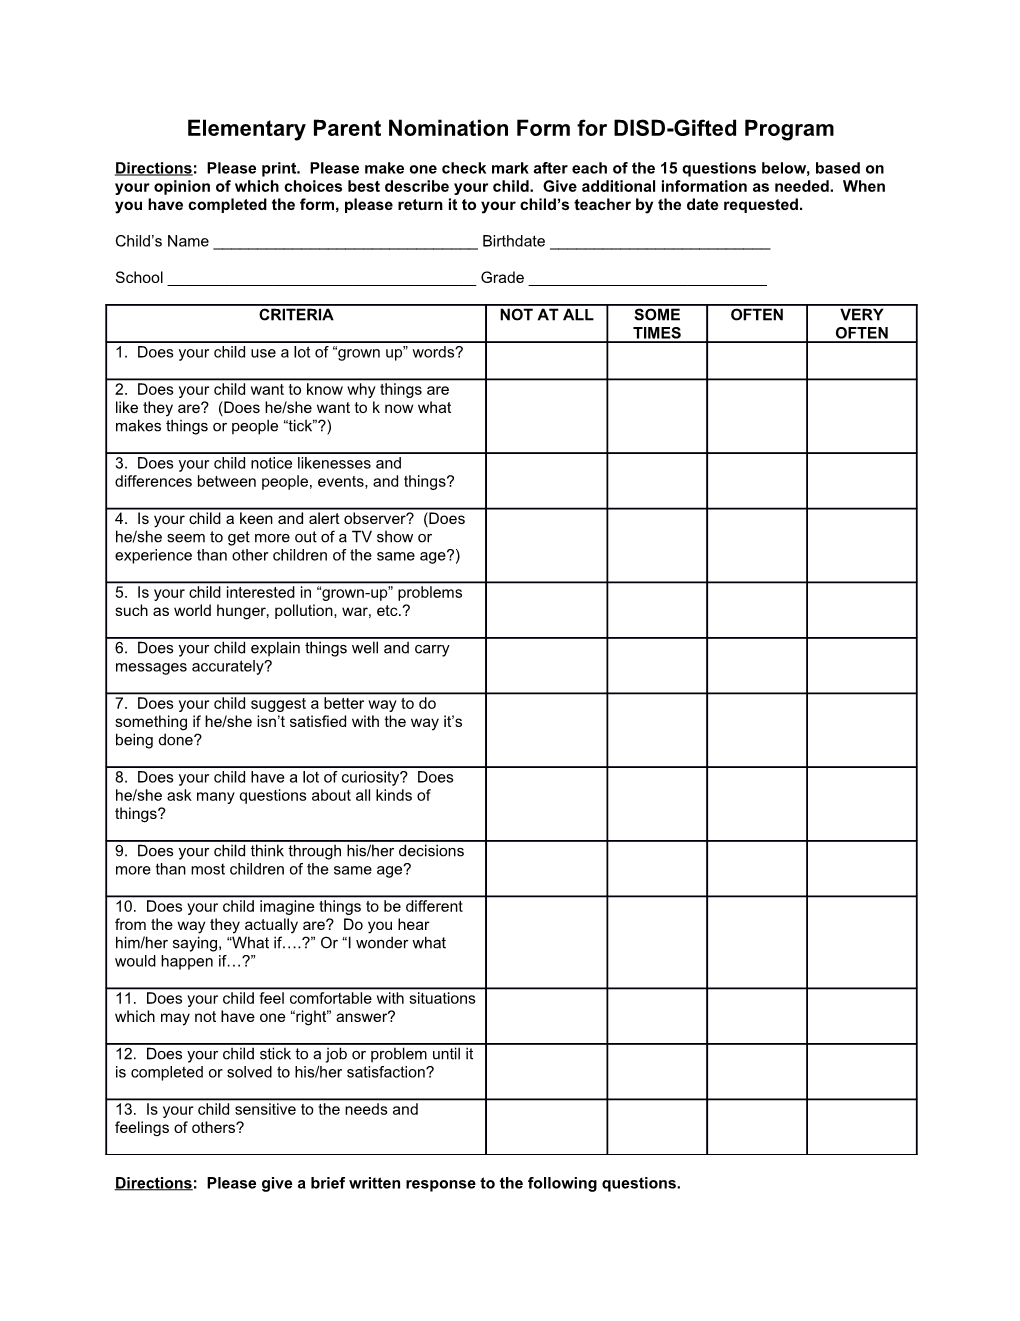 Elementary Parent Nomination Form for DISD-Gifted Program